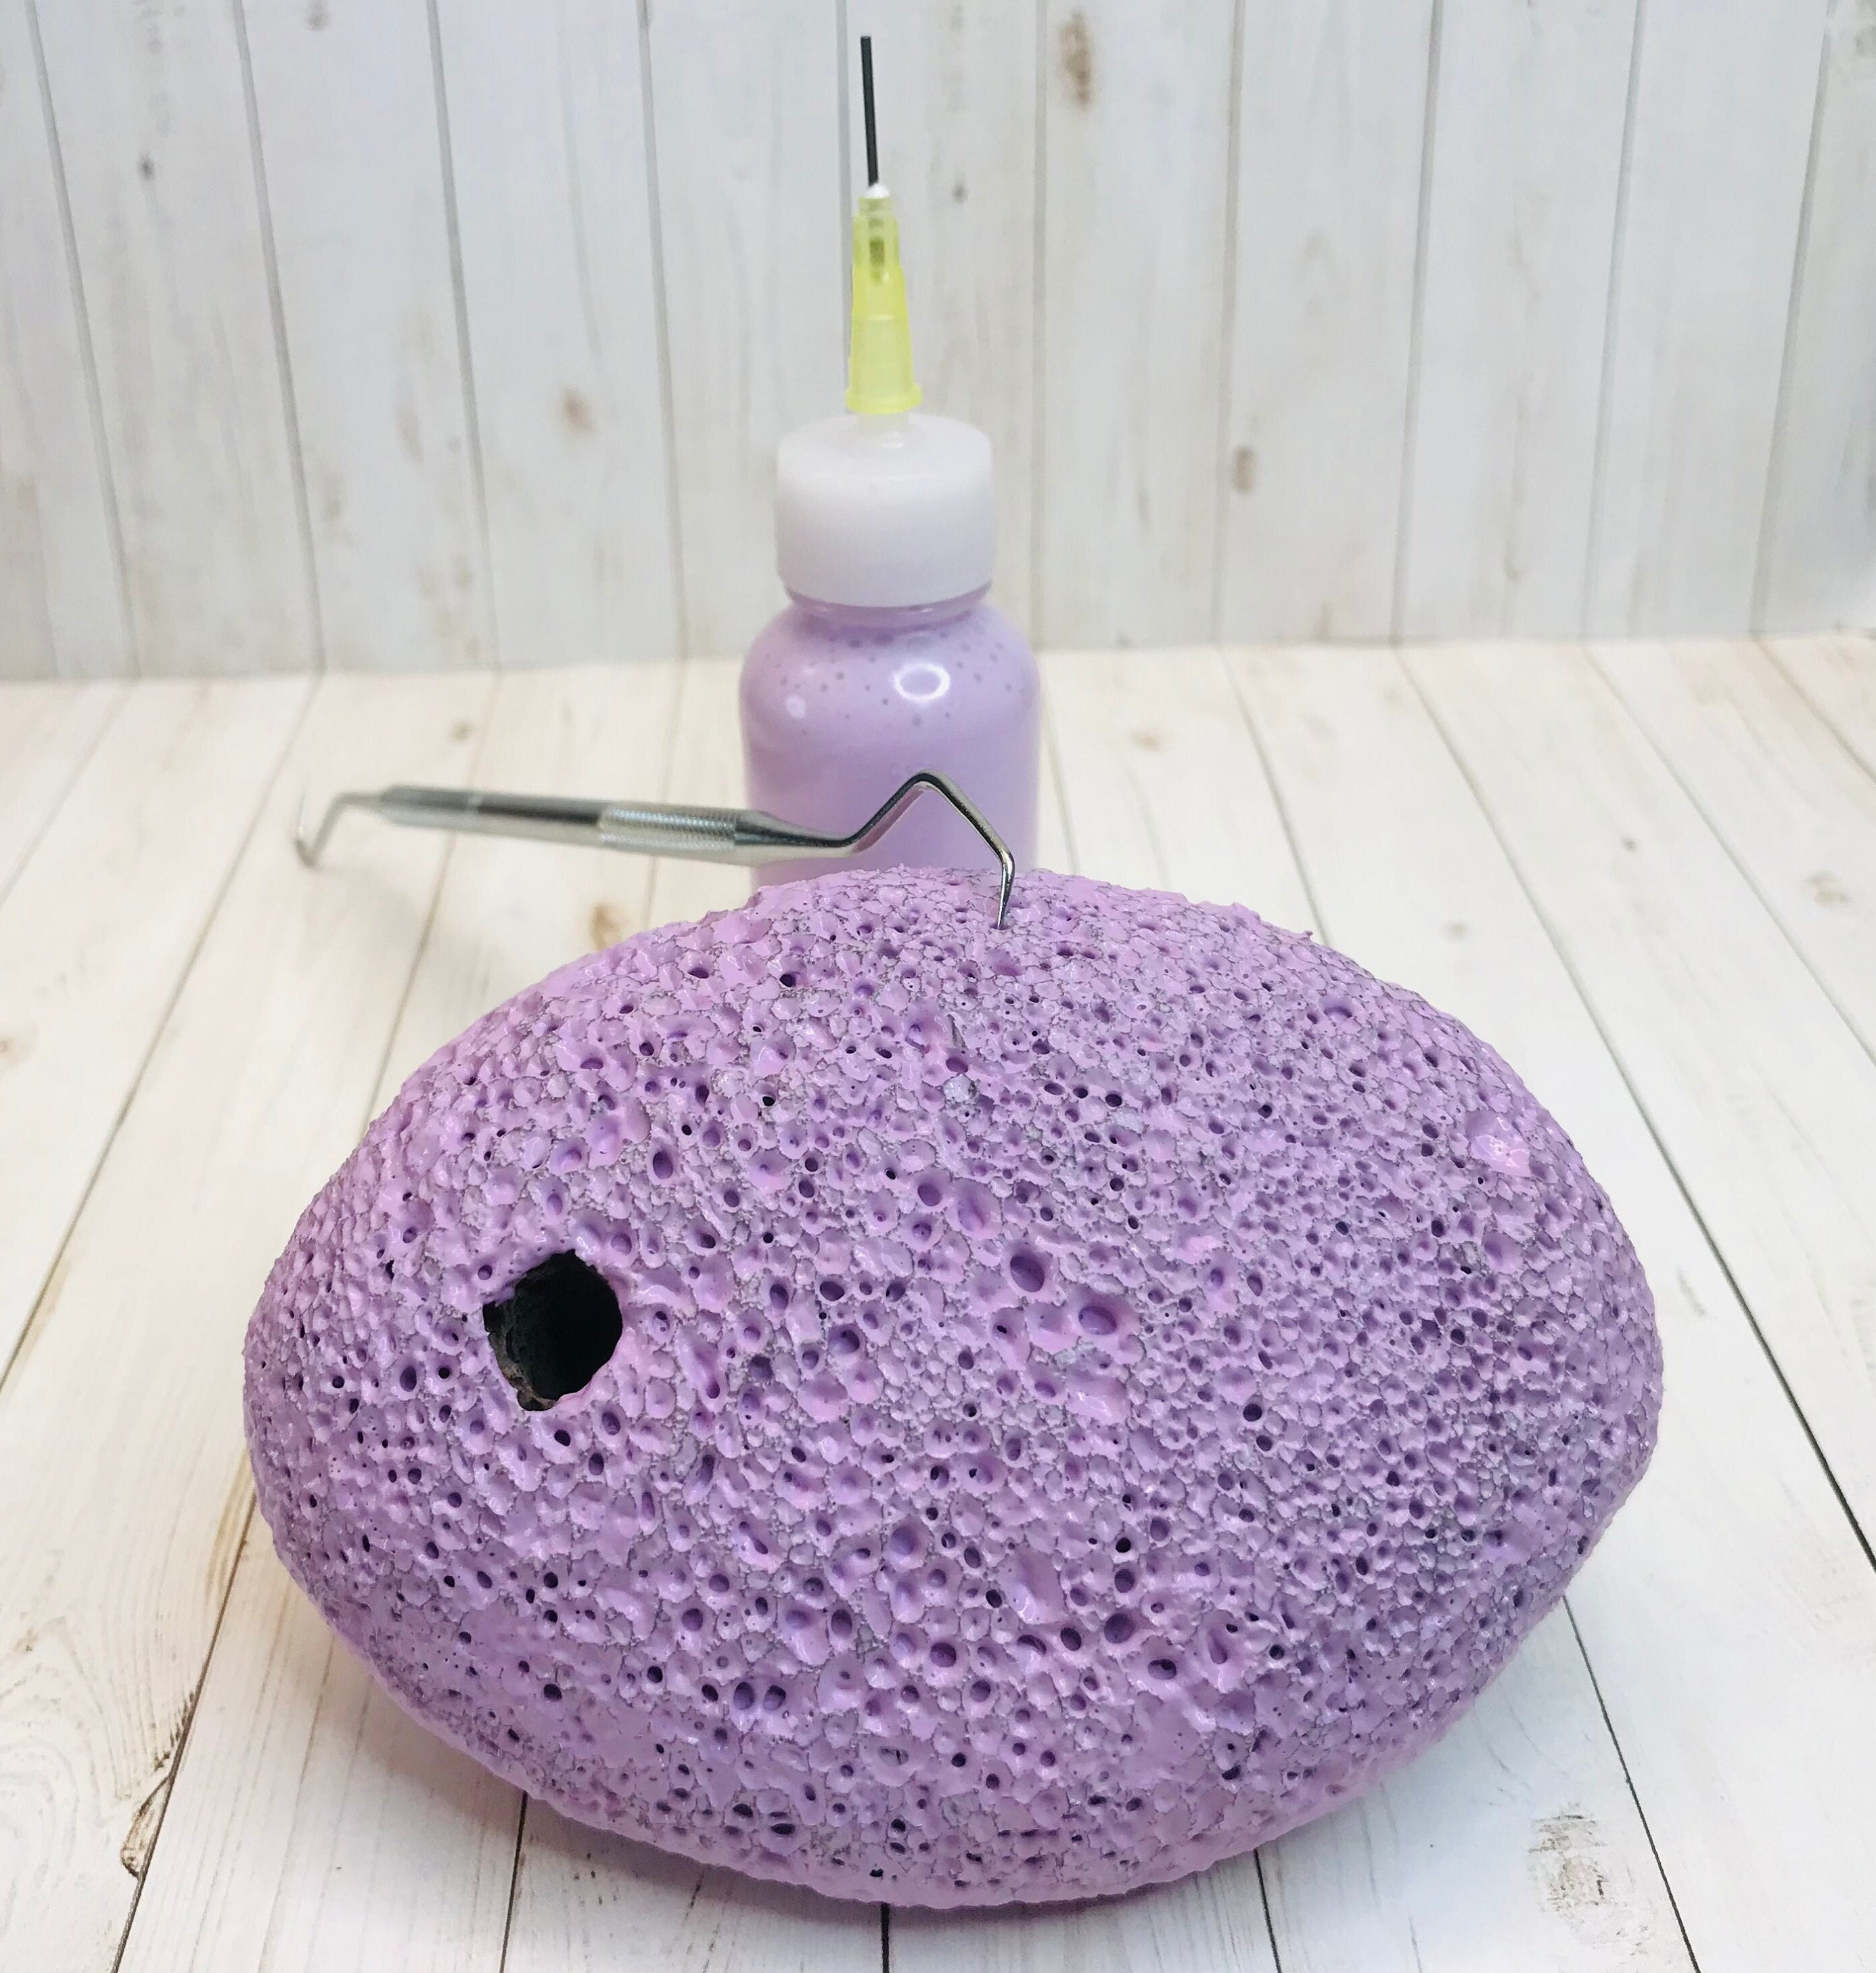 Picky Party. Anxiety Relief Sensory Activity Pumice Stone Kit for